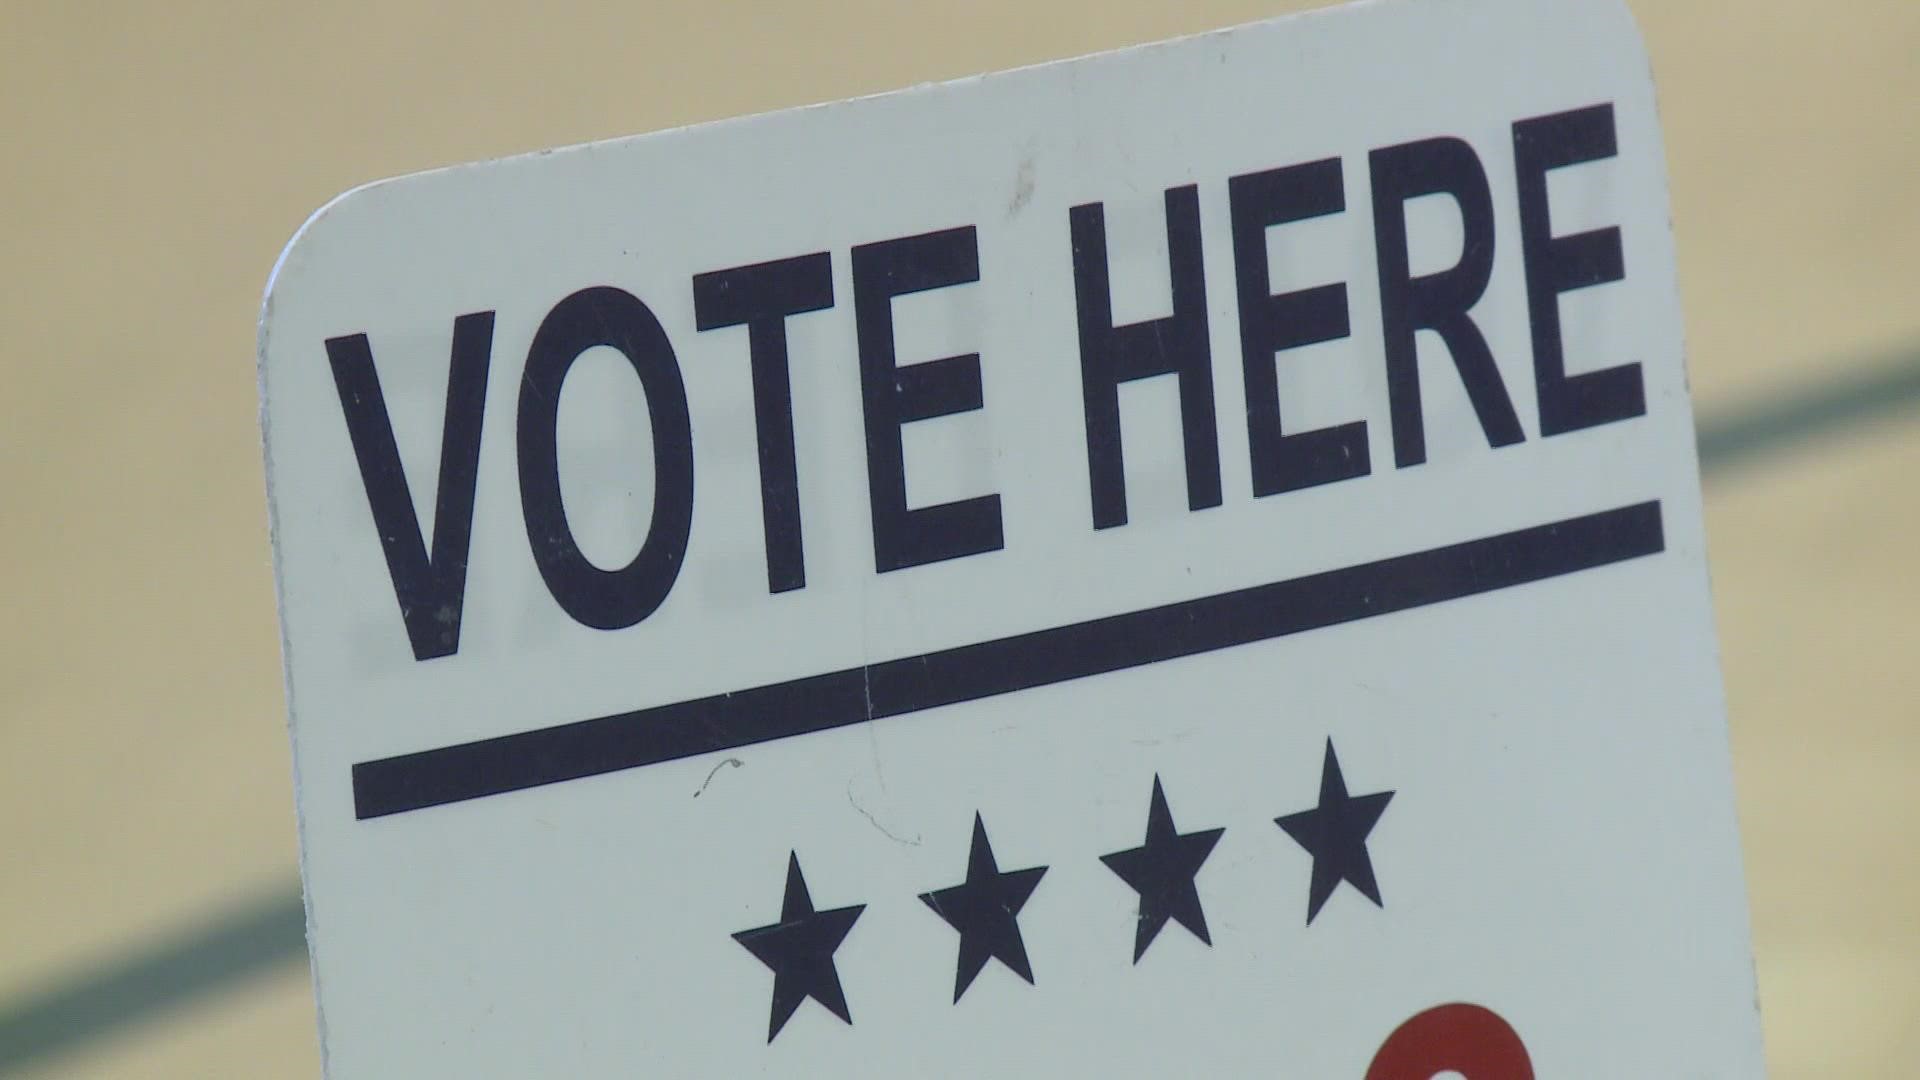 Here's a look at the results from the Dec. 11 elections in the New Orleans Metro area